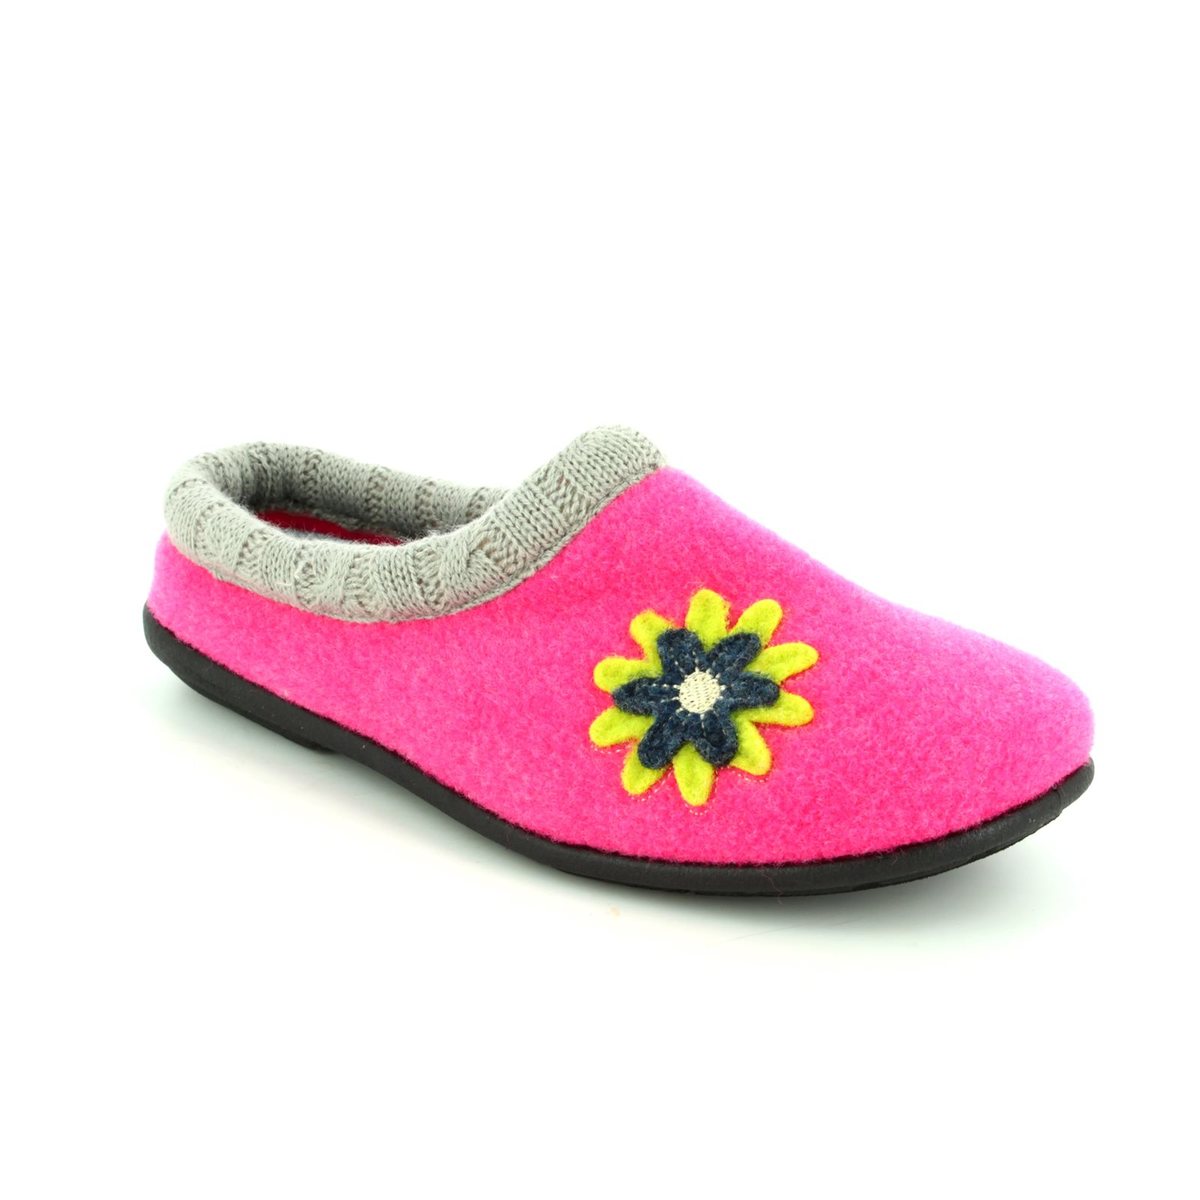 Padders Freesia Pink Glitz Womens slippers 4018-53 in a Plain Textile in Size 3